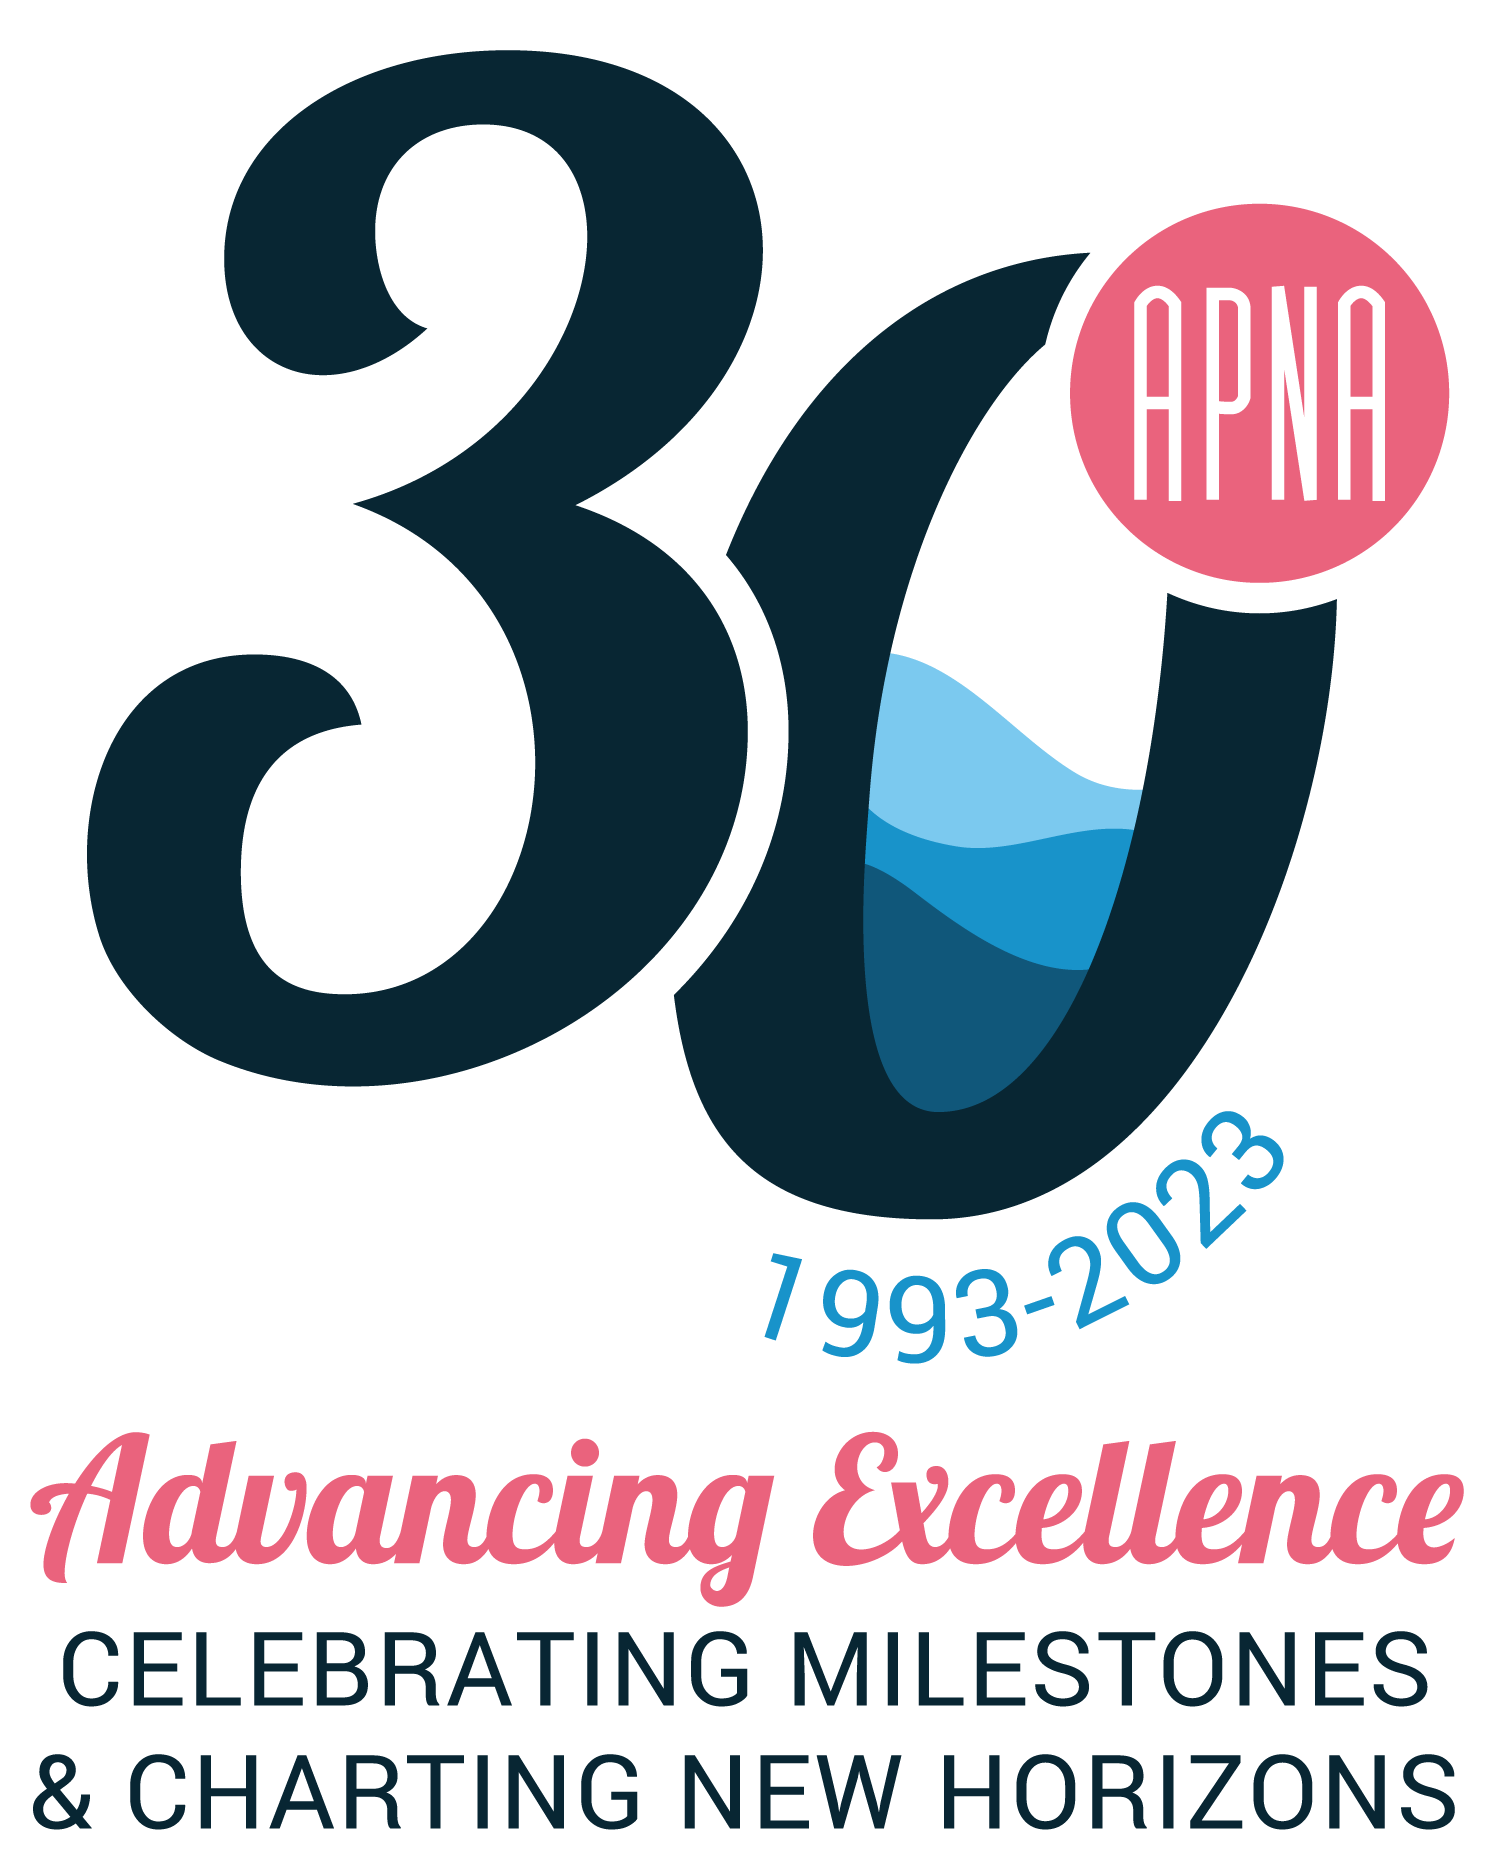 Annual Conference 2023 The Association of Premier Nanny Agencies